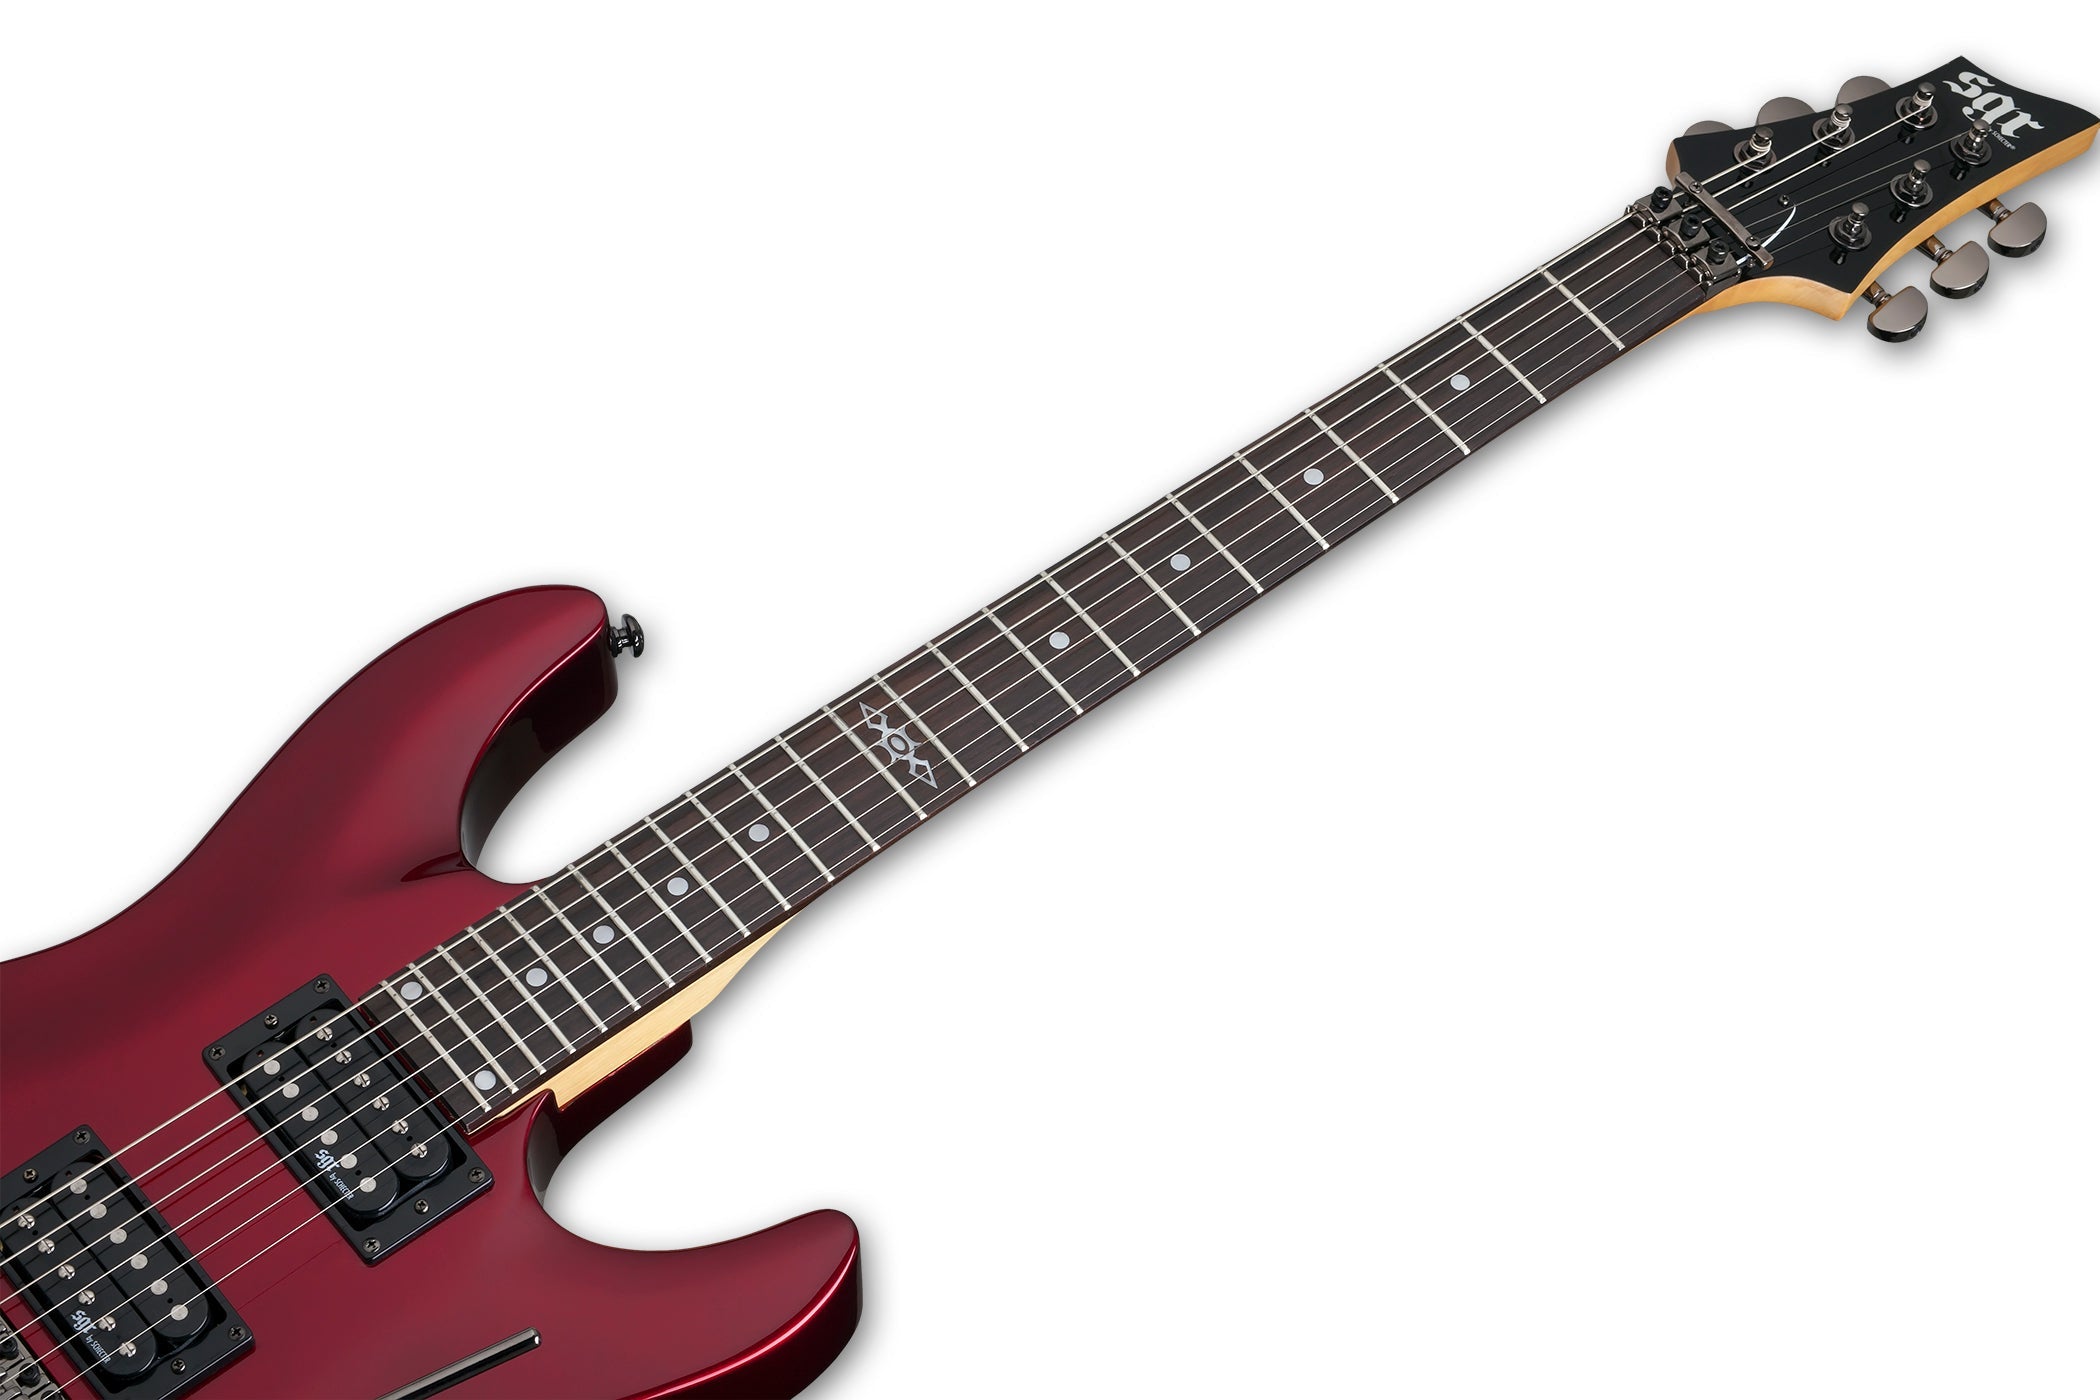 Schecter SGR C-1 Electric Guitar with Floyd Rose - Metallic Red